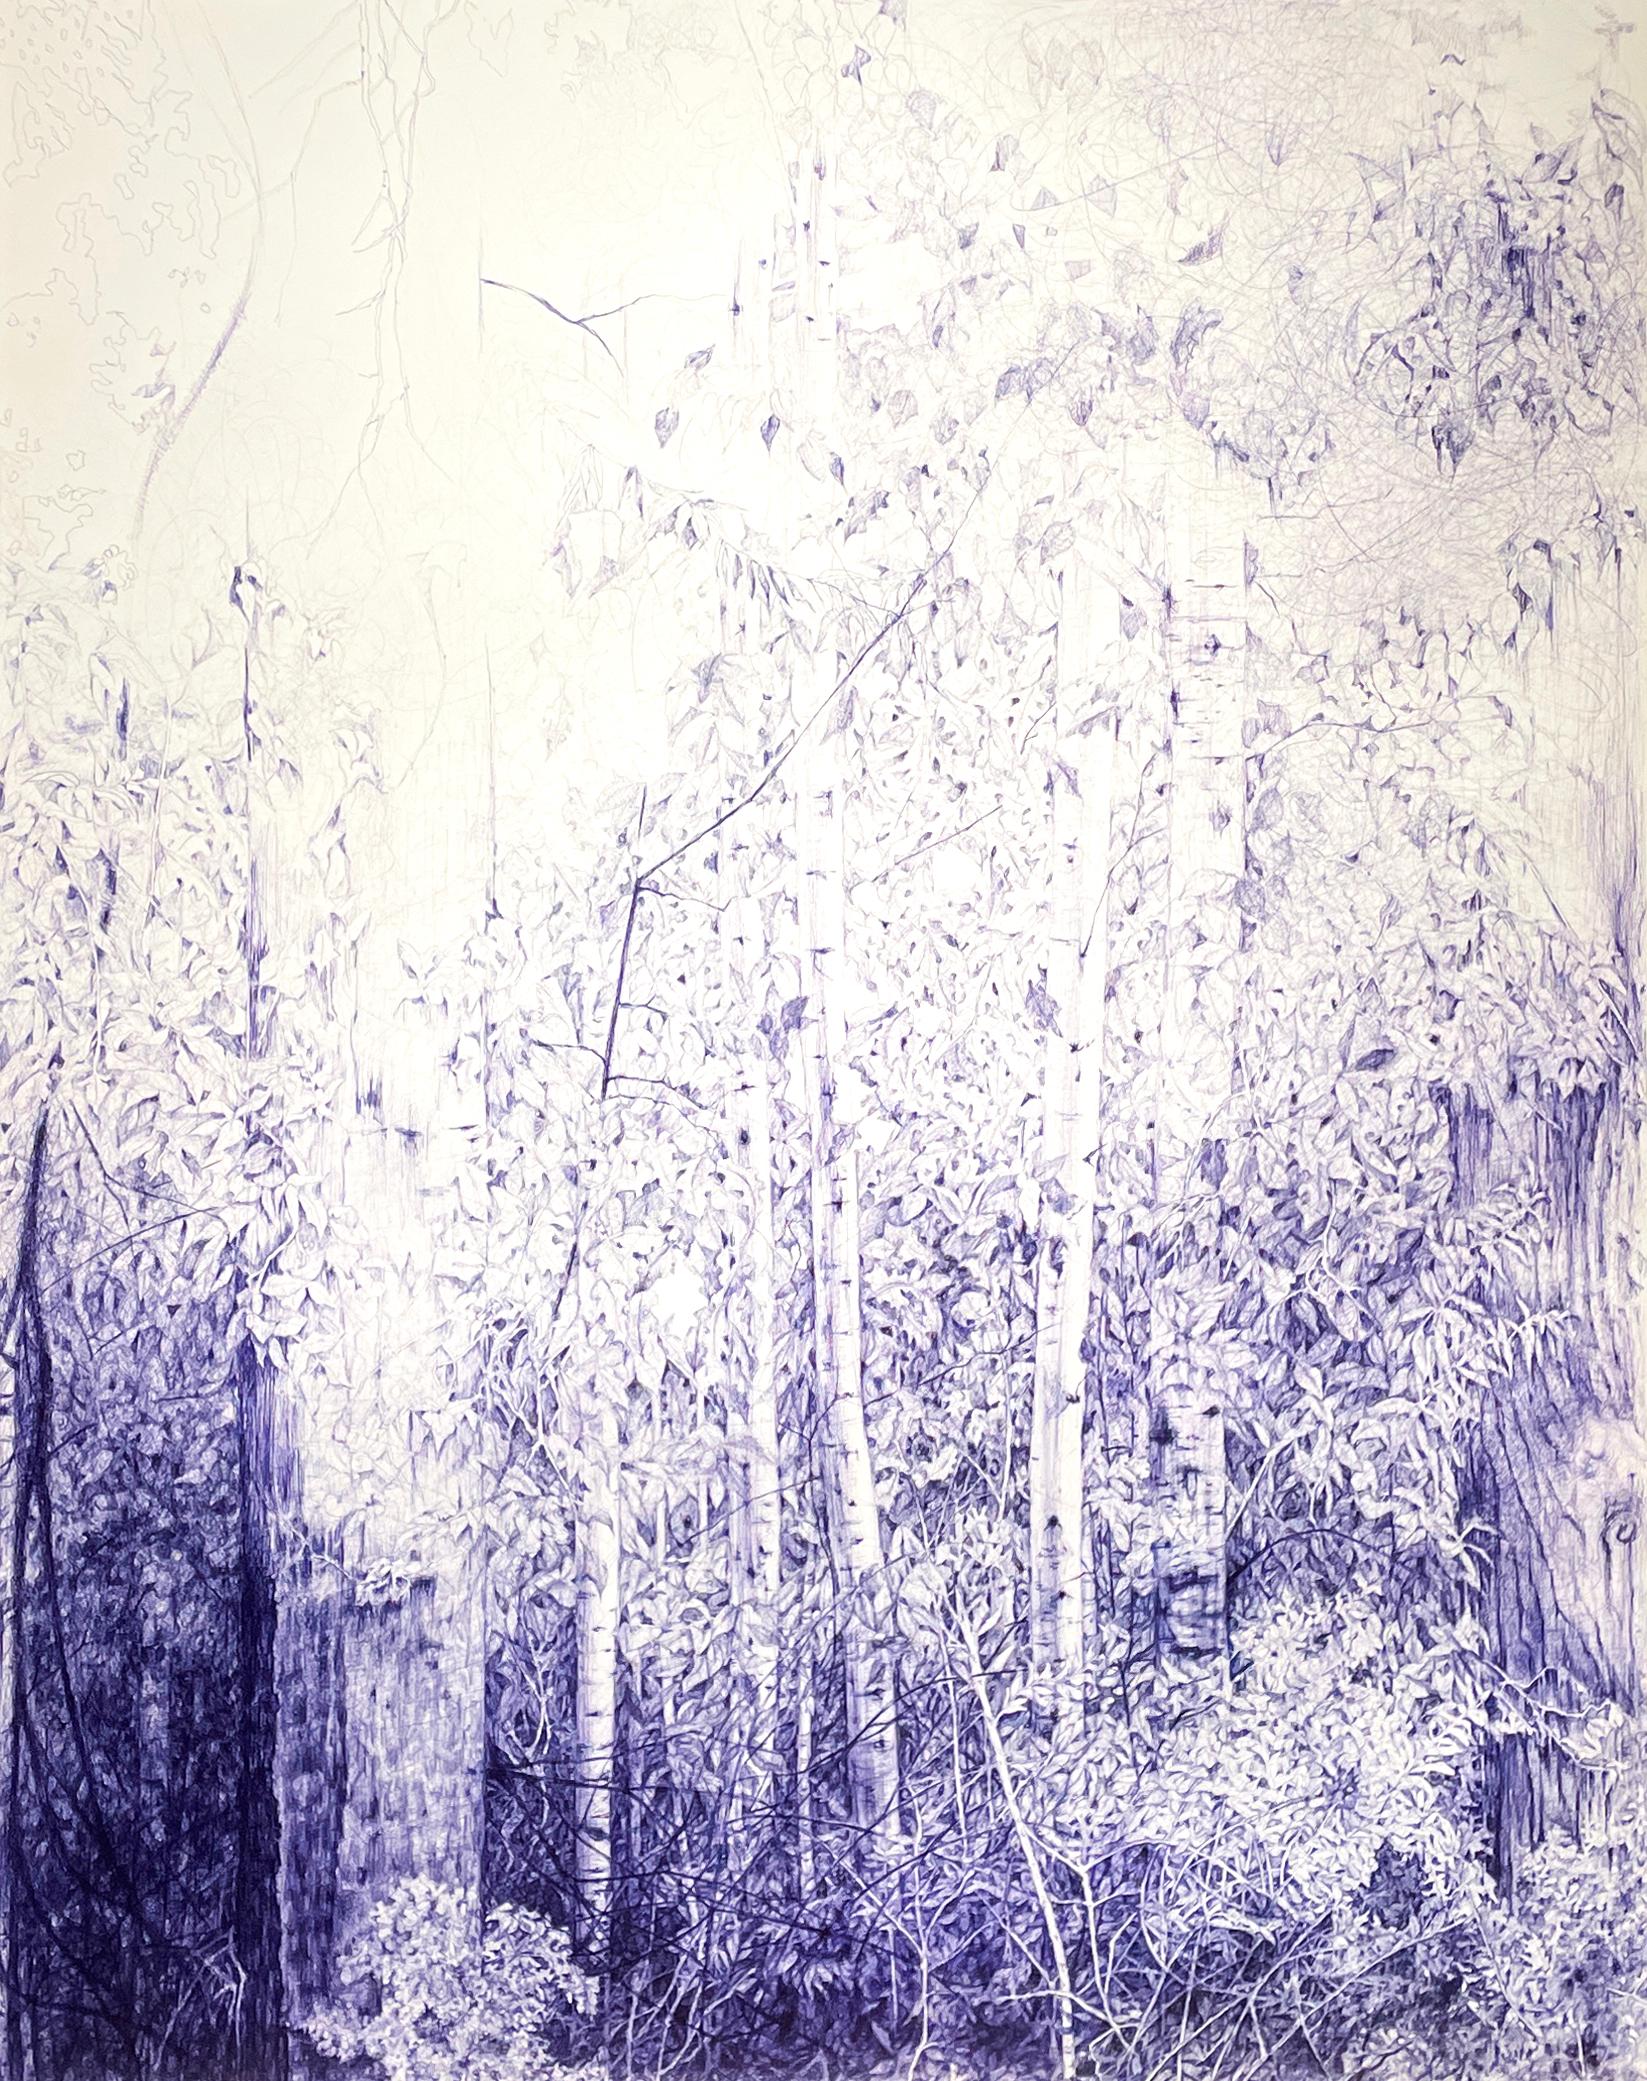 Linda Newman Boughton Landscape Art - Yield and Overcome (Landscape Drawing of Forest in Archival Blue Ballpoint Pen)